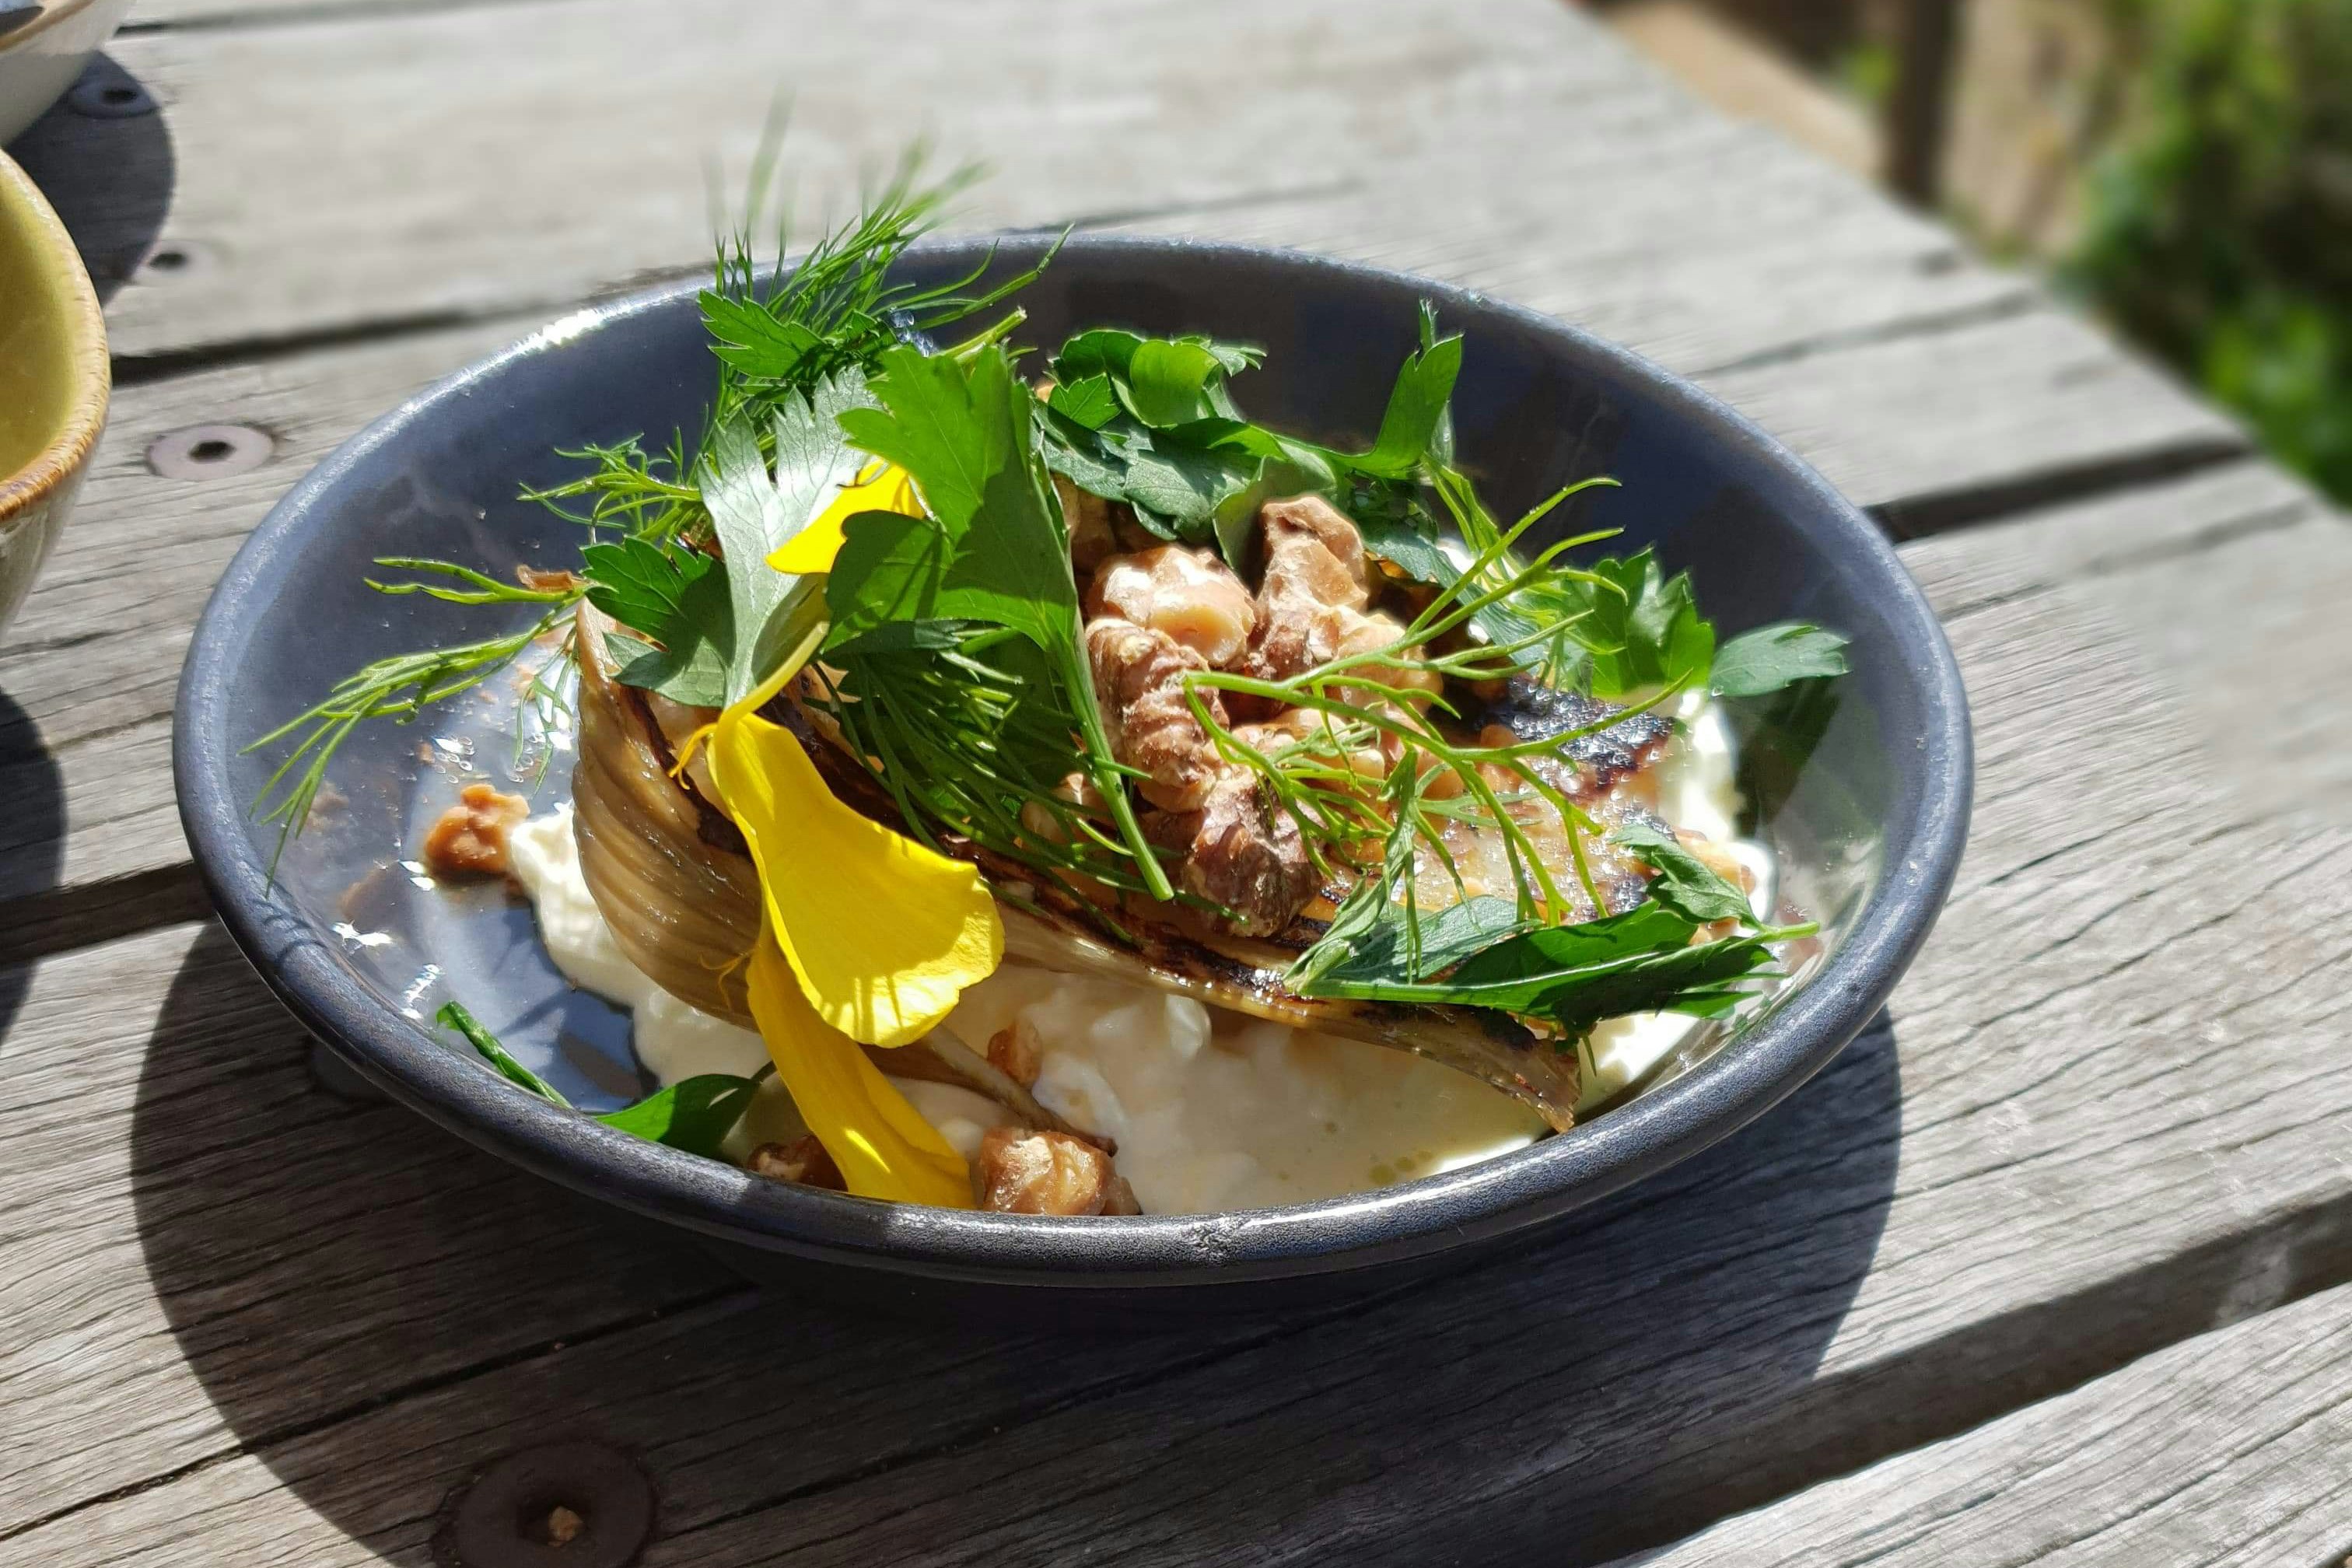 A grey dish sits on an outdoor wooden table at Montalto. The dish contains chargrilled fennel with ricotta cheese, and is decorated withe yellow petals.